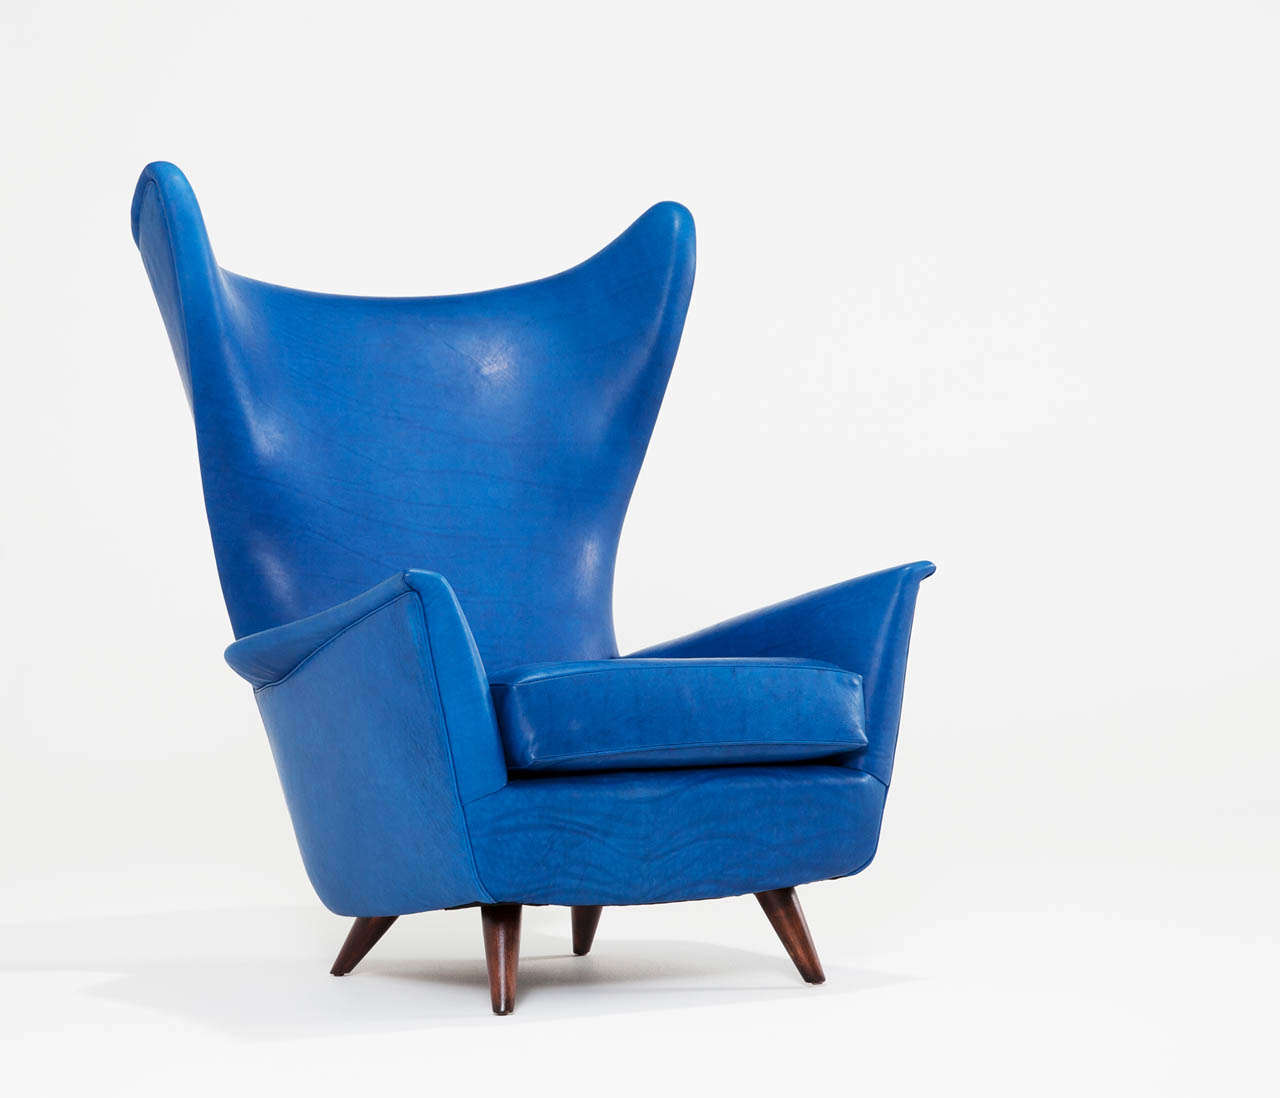 Interesting shaped Italian midcentury wingback chair completely reupholstered in high quality Sapphire blue leather, or can be reupholstered to any fabric of your choice. 

Very elegant shapes which are emphasized by the slim design and the unique